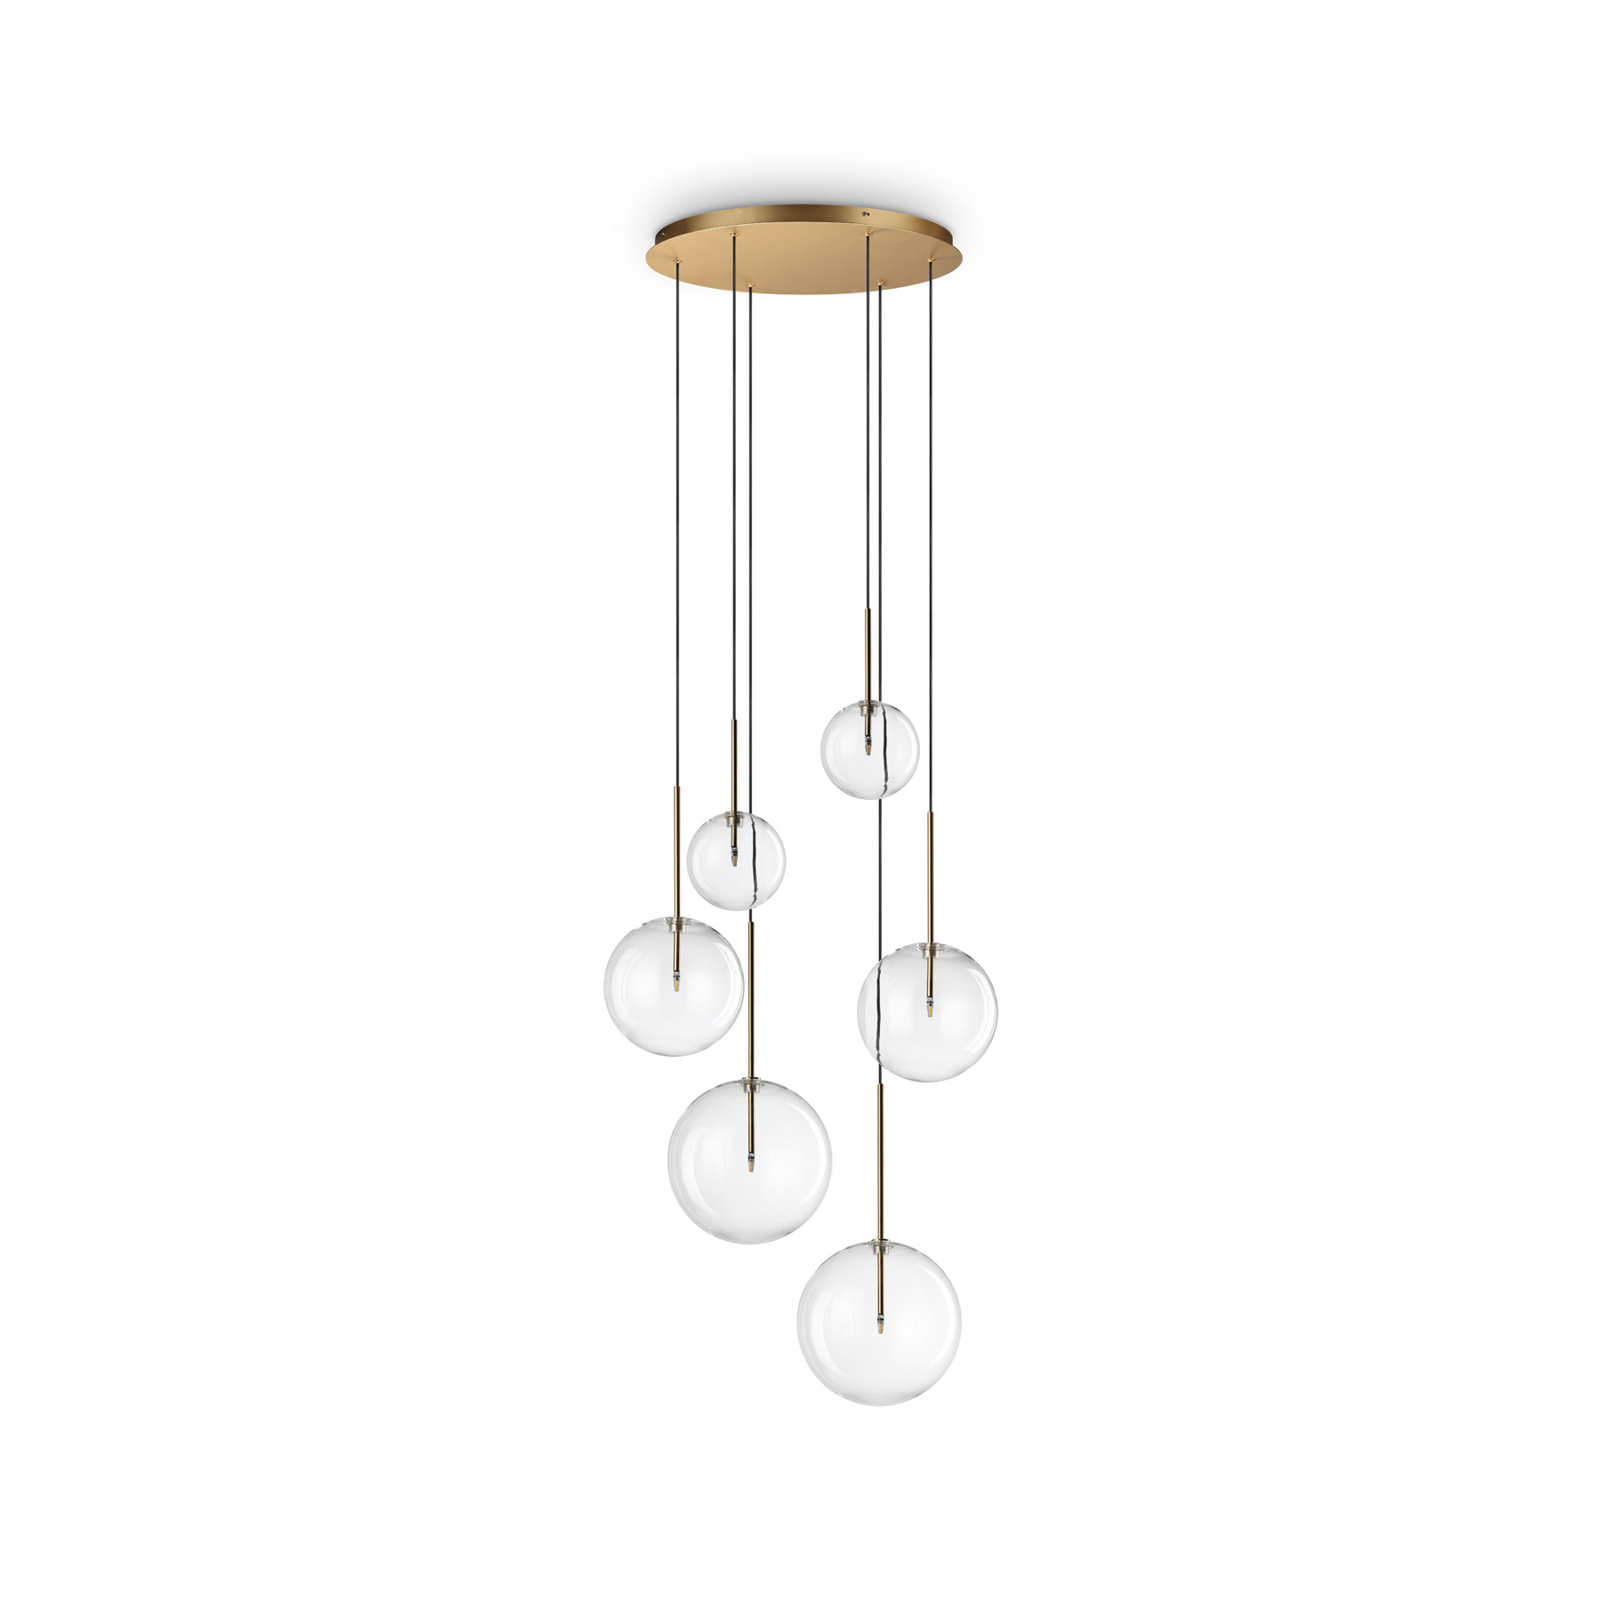 Ideal Lux Equinoxe hanging light 6-light brass-coloured clear glass